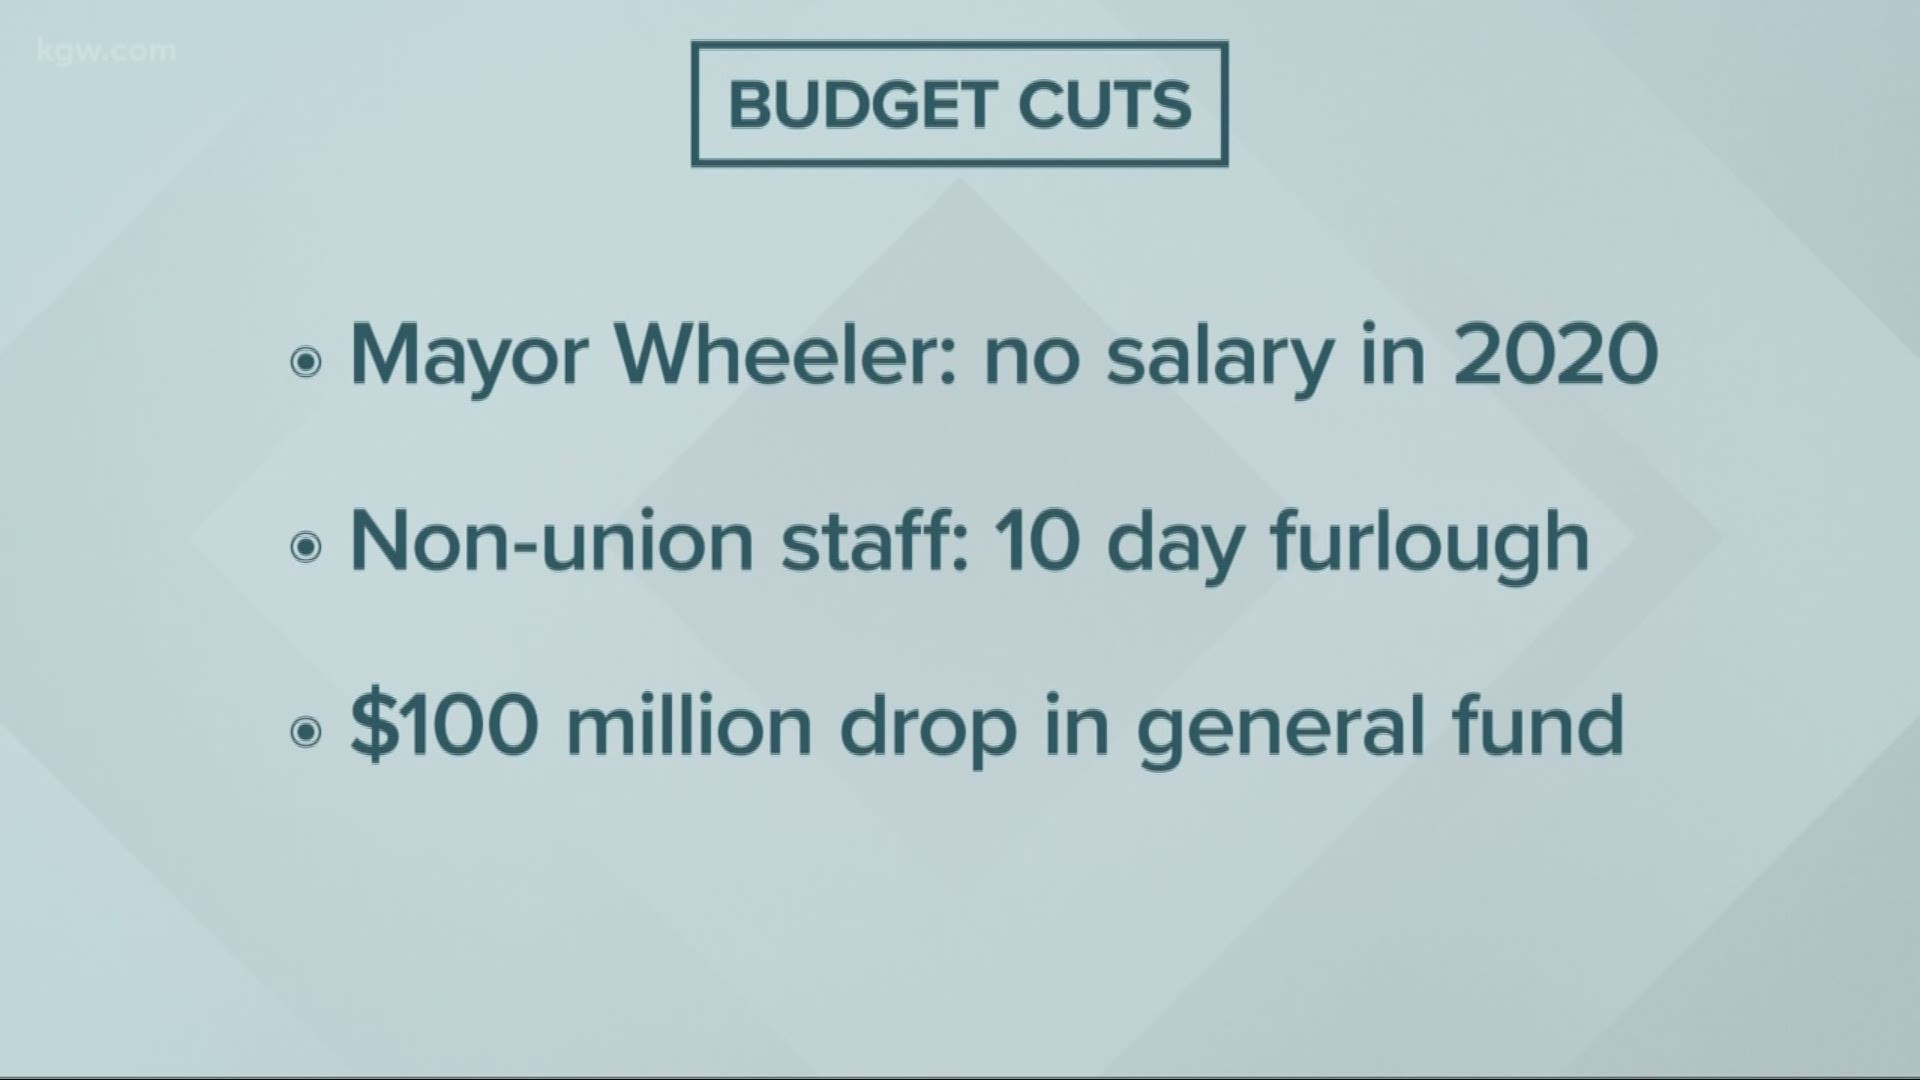 Wheeler has eliminated his own salary for the rest of 2020 as the city faces a budget shortfall amid the COVID-19 pandemic.